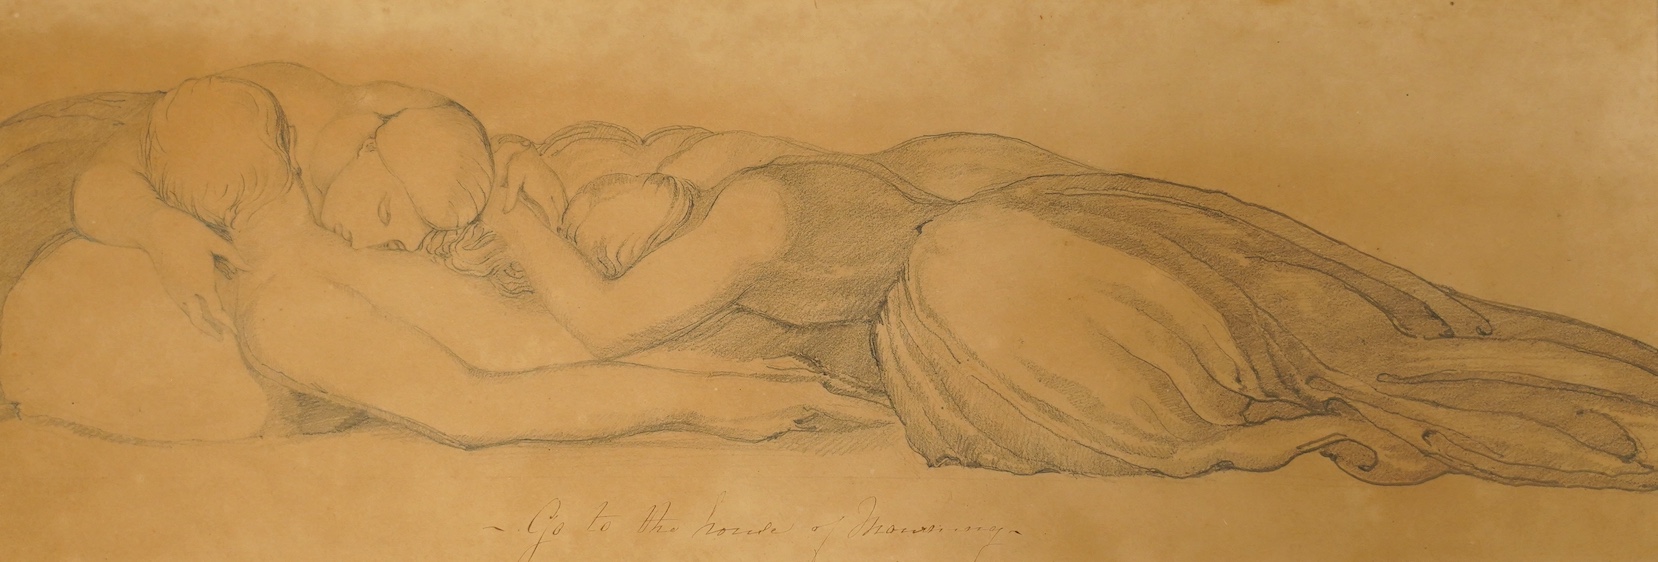 19th century English School, pencil sketch, 'Go to the hour of mourning', unsigned, inscribed in ink, 14 x 40cm. Condition - fair, discolouration to the paper